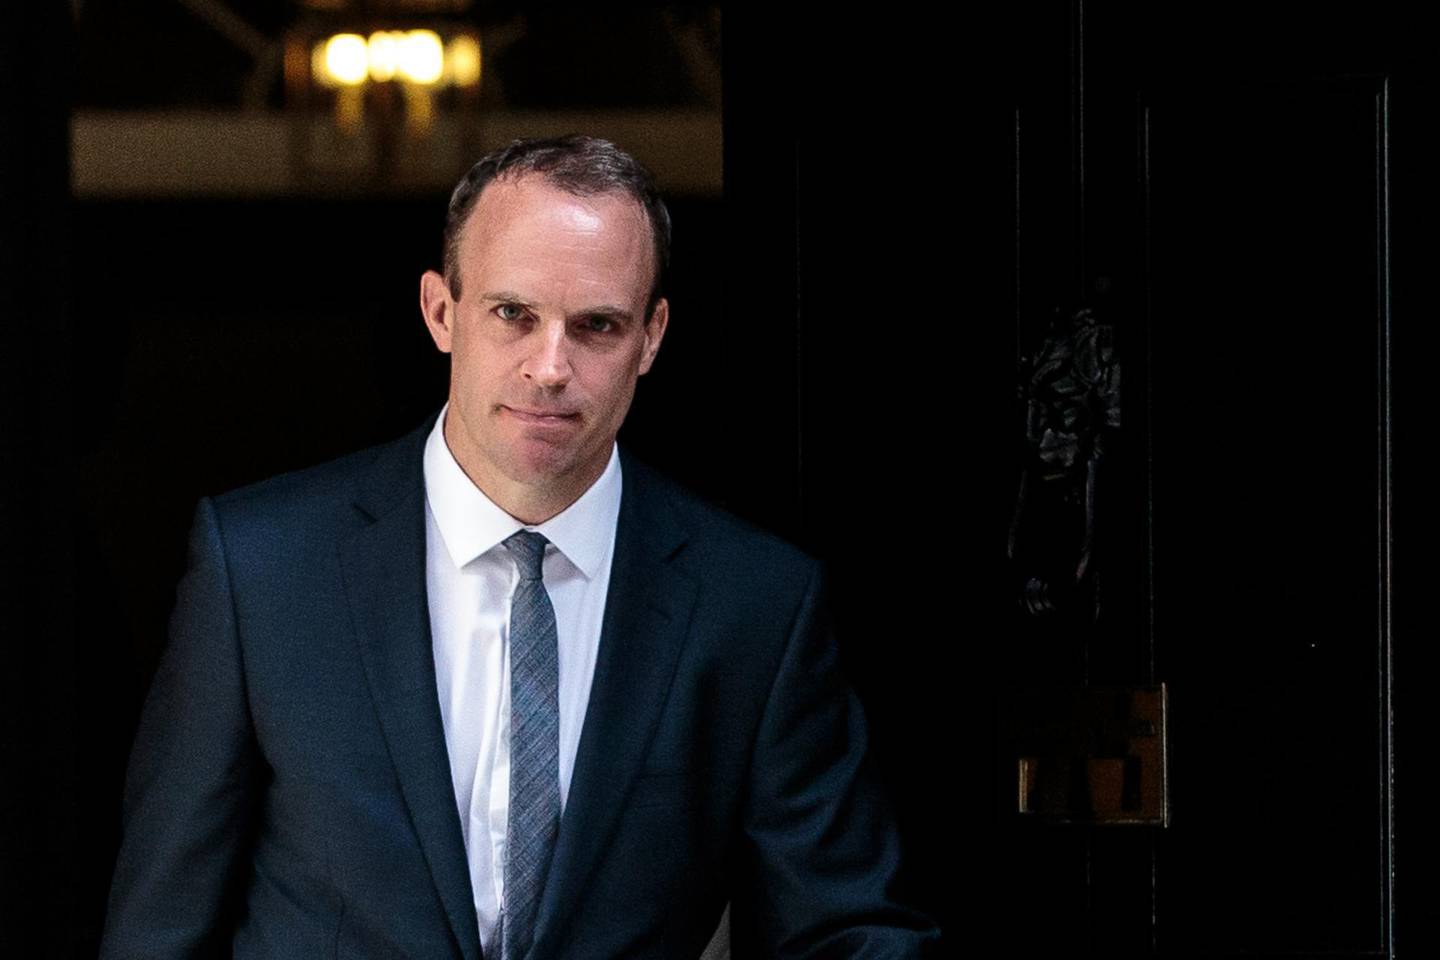 LONDON, ENGLAND - JULY 09: Dominic Raab leaves Number 10 Downing Street after being appointed Brexit Secretary by British Prime Minster Theresa May on July 9, 2018 in London, England. Last night David Davis quit as Brexit Secretary over his opposition to Mrs May's plan for the UK's future relations with the EU. (Photo by Jack Taylor/Getty Images)